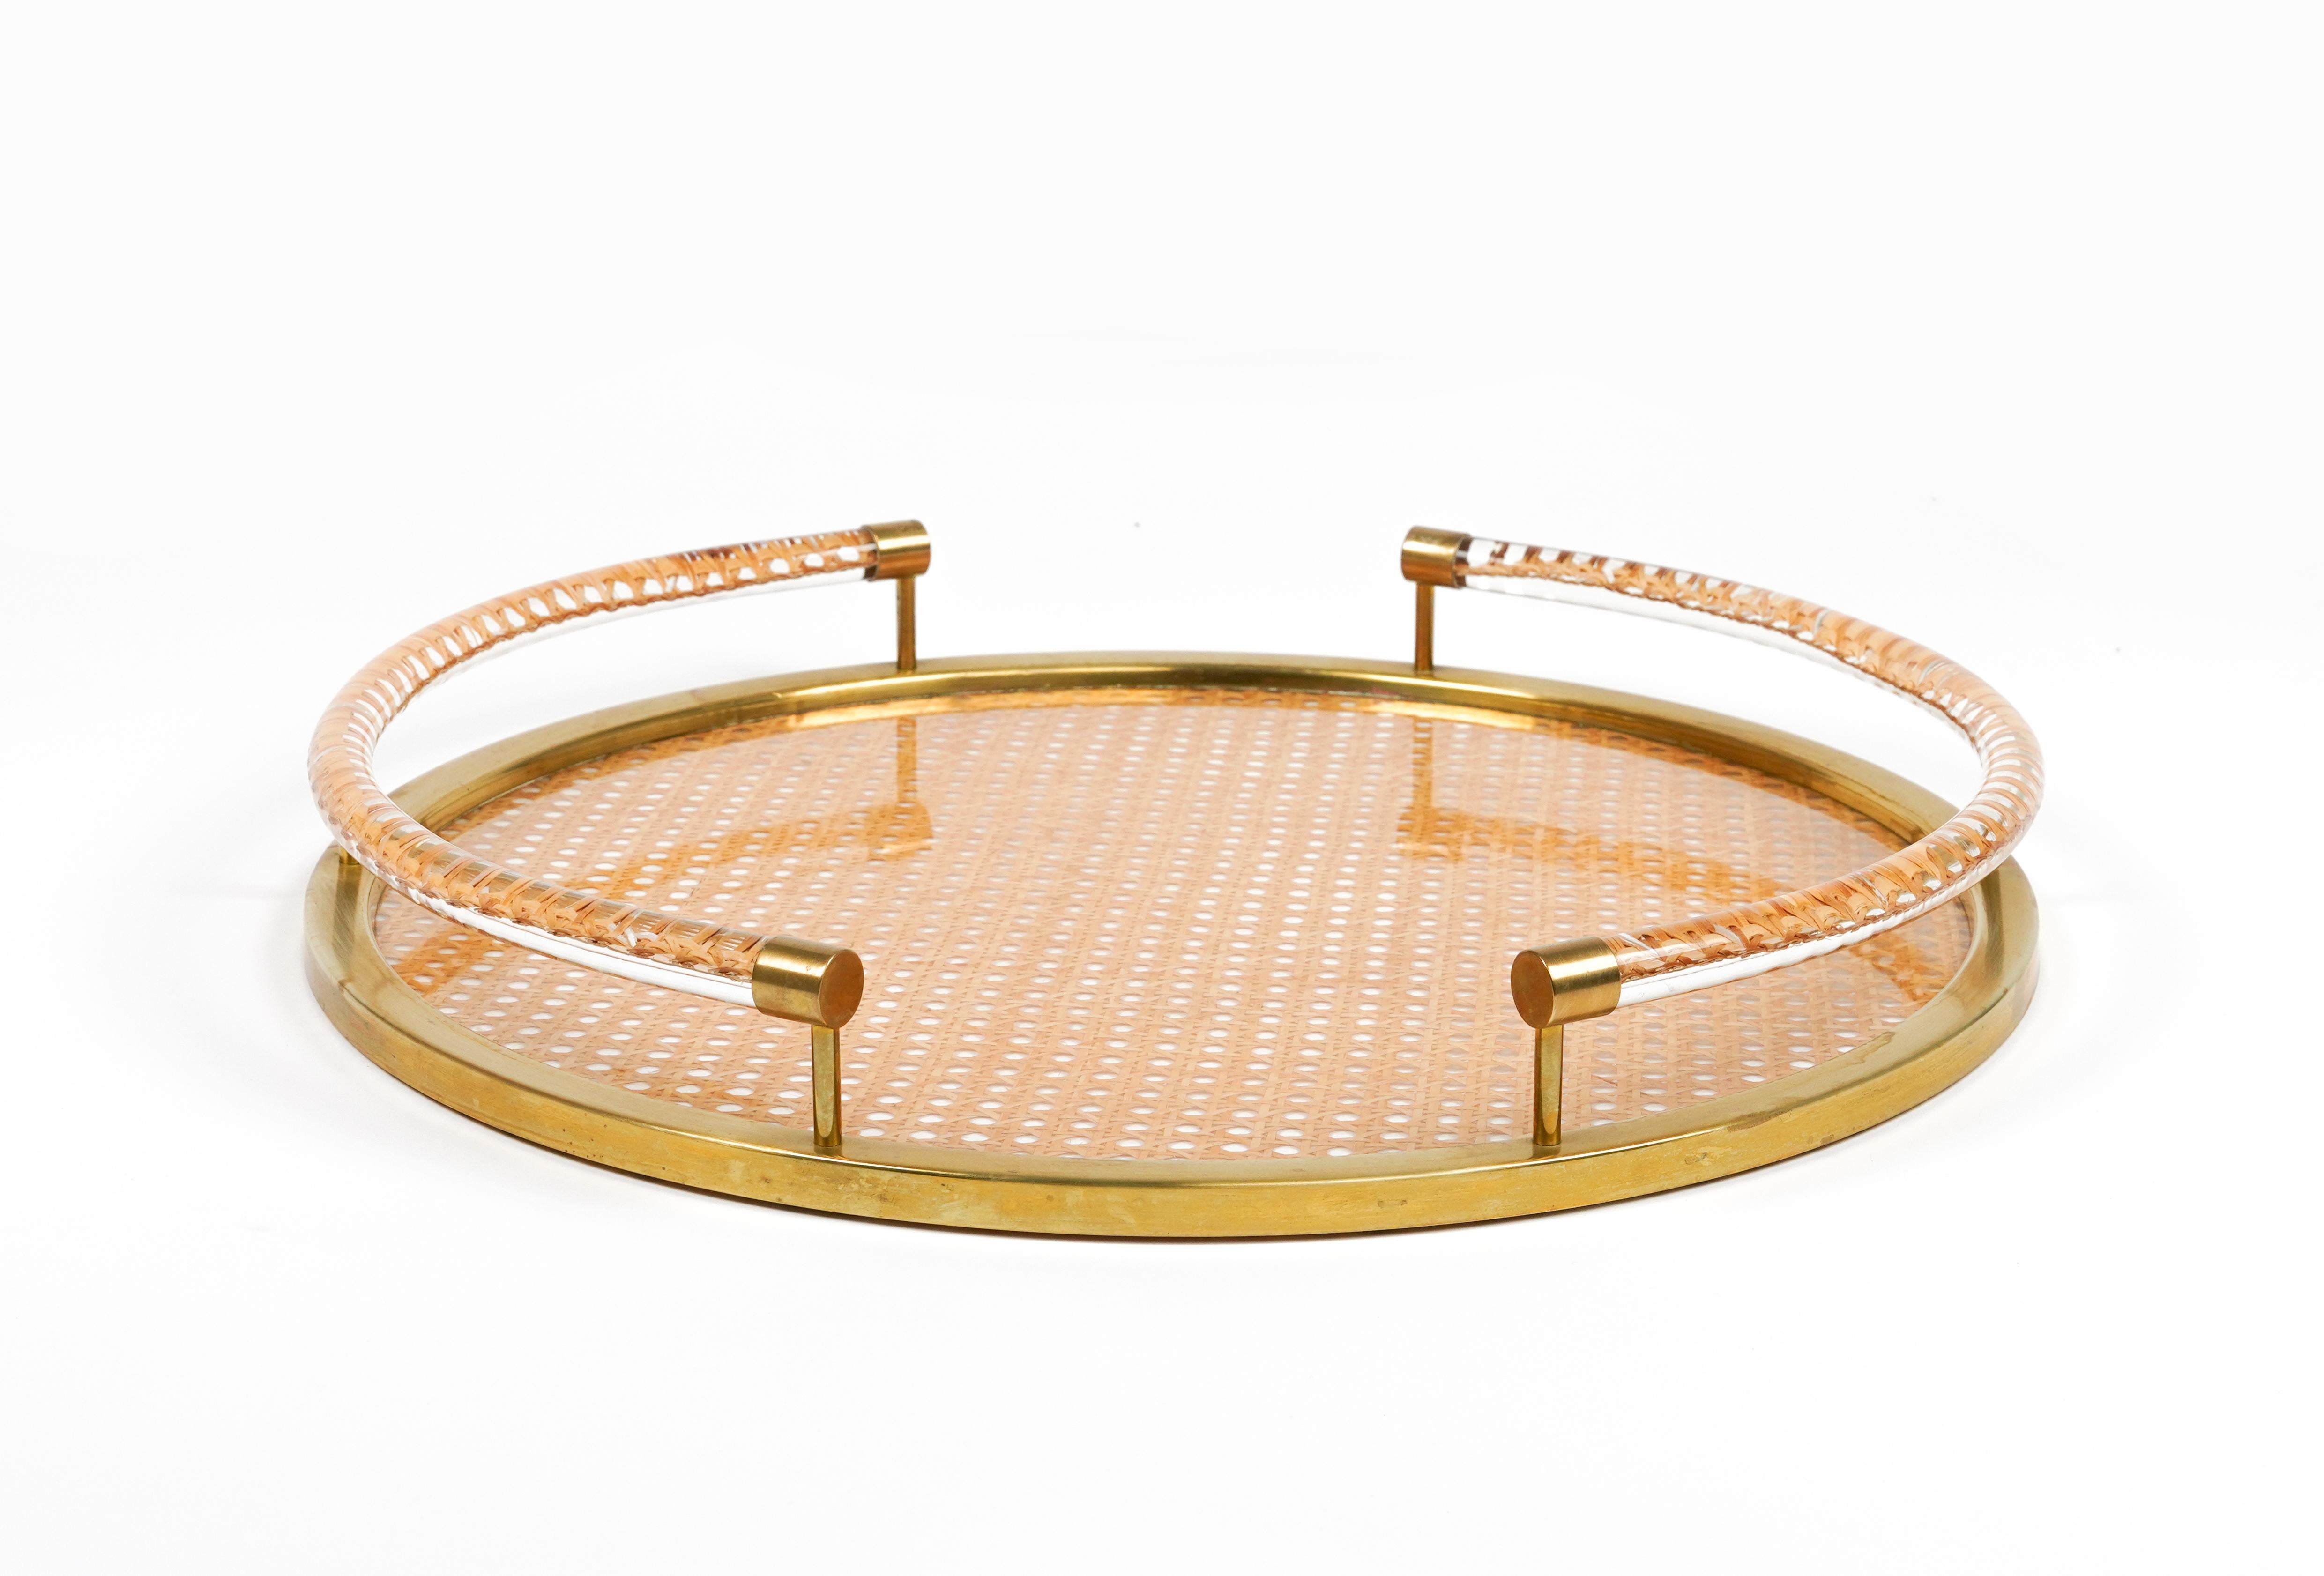 Round Serving Tray in Lucite, Rattan and Brass Christian Dior Style, Italy 1970s For Sale 3